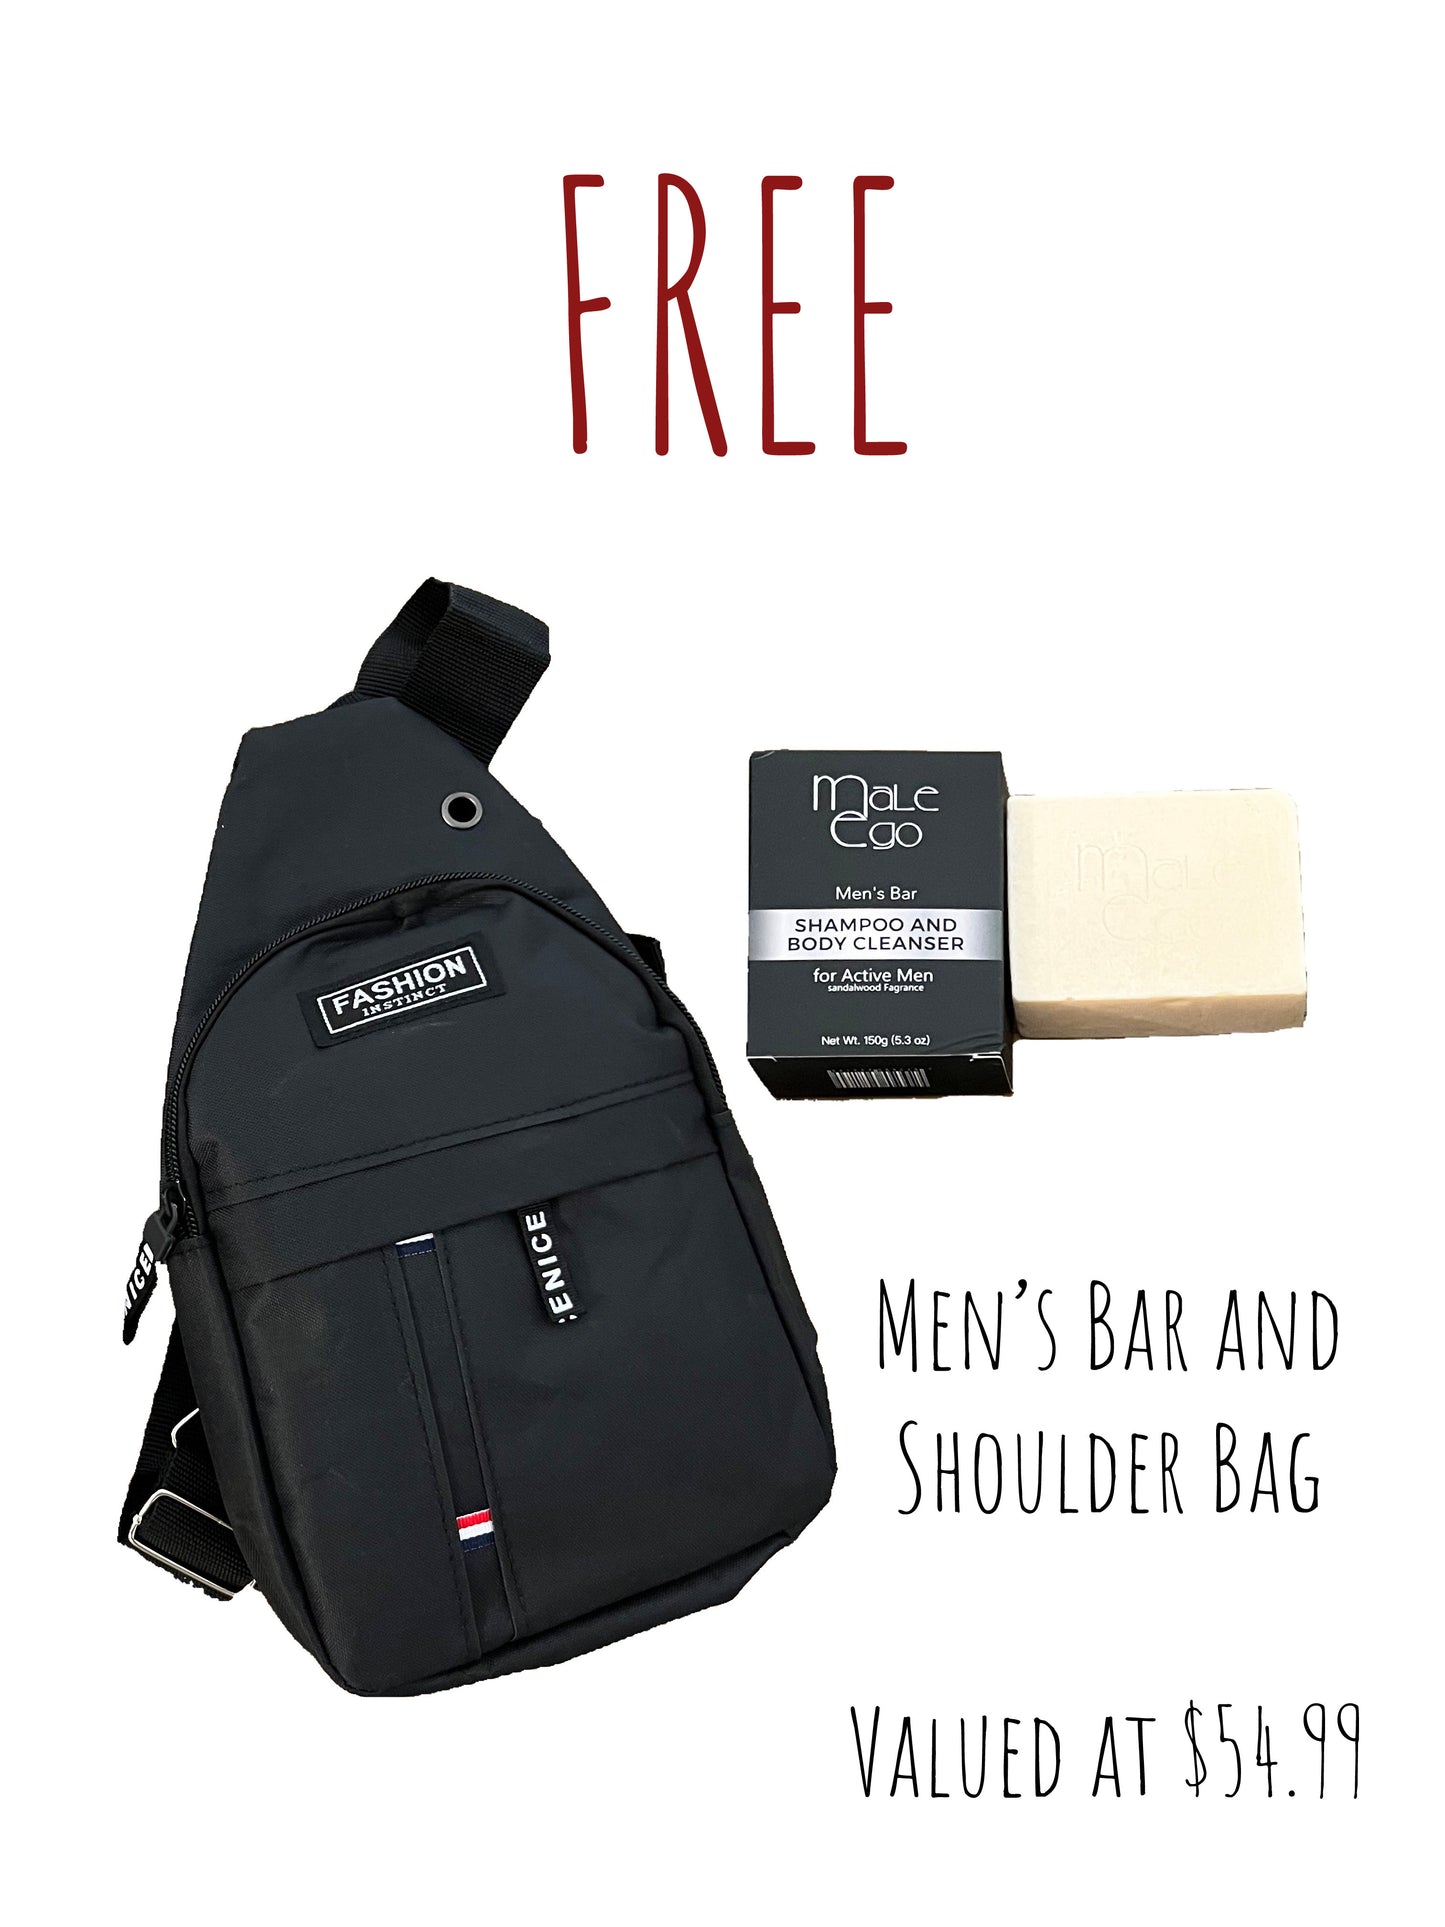 FREE Men’s Bar & Shoulder Bag Bundle (Free with purchase of two solid colognes)